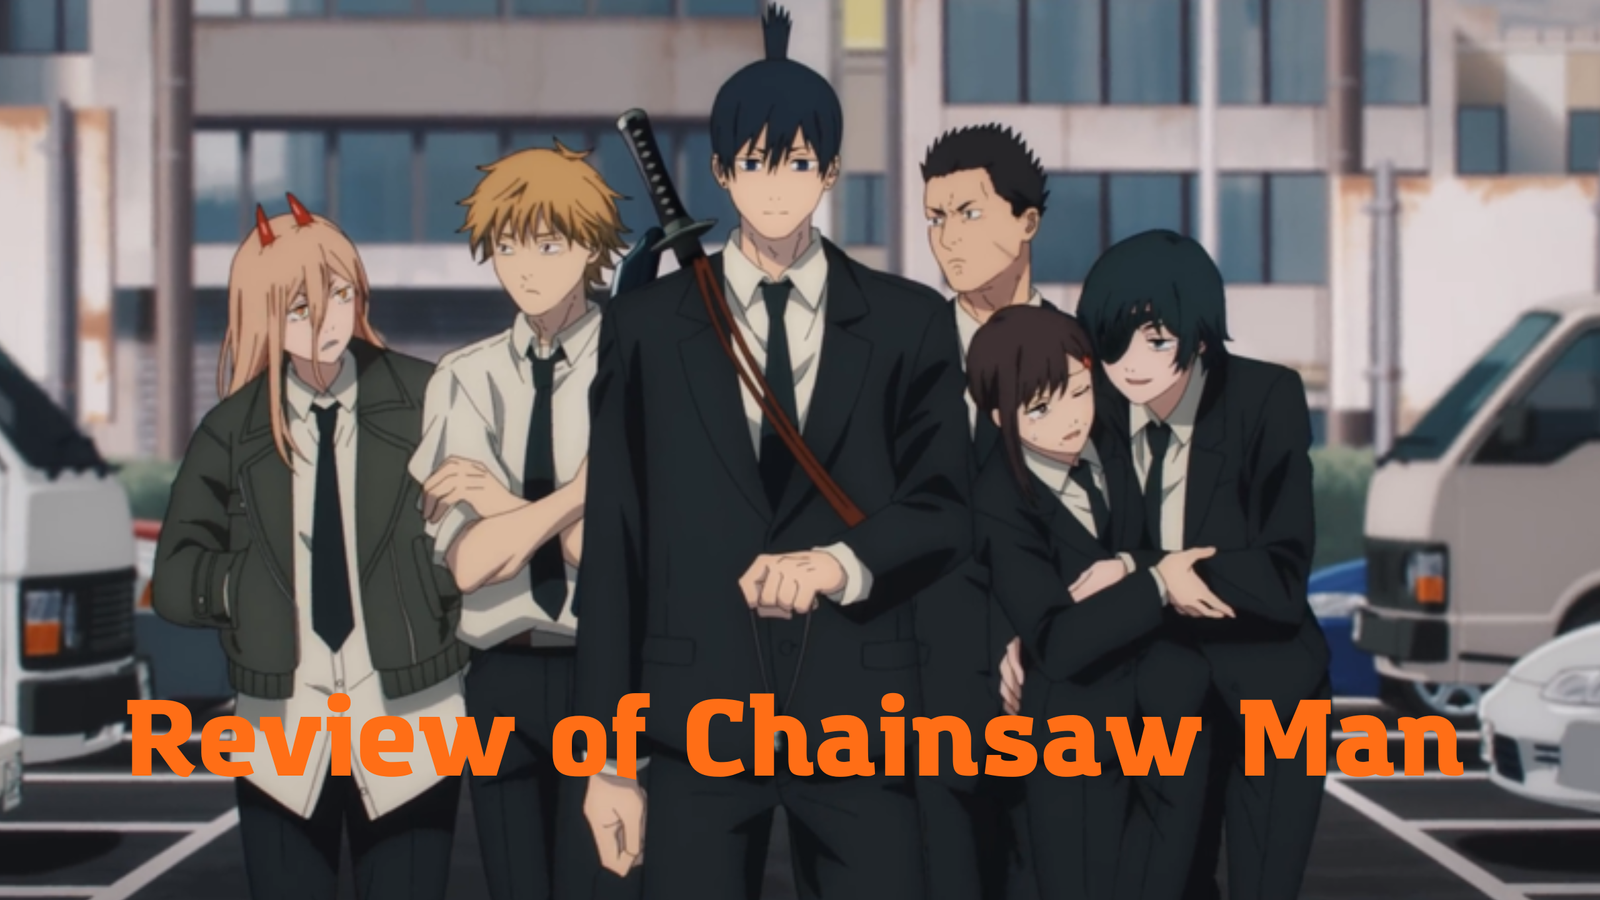 Chainsaw Man: Review of Chainsaw Man to Read or Watch This Artful Action Series